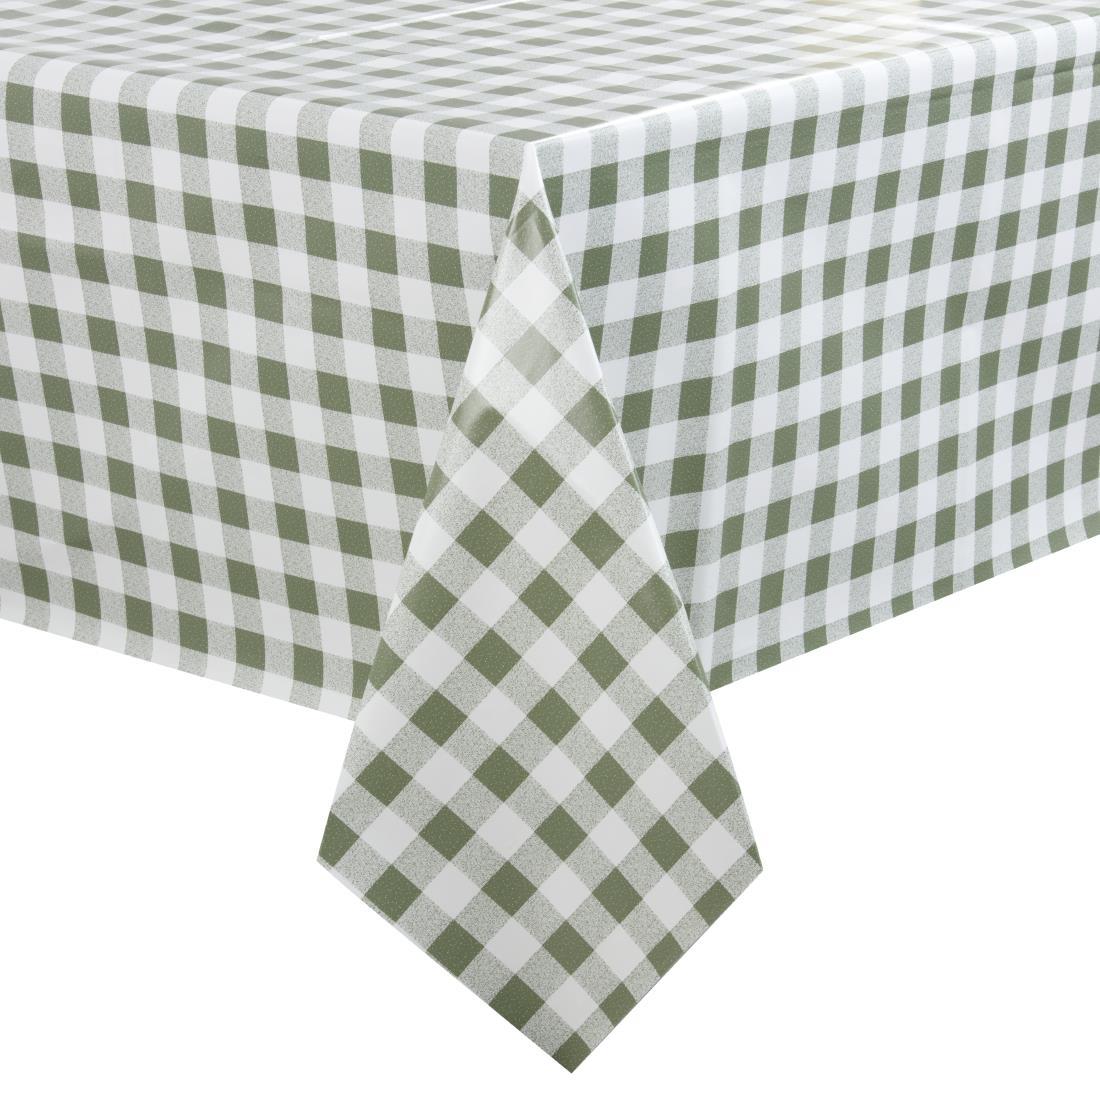 PVC Chequered Tablecloth Green 54 x 90in - E663  - 1